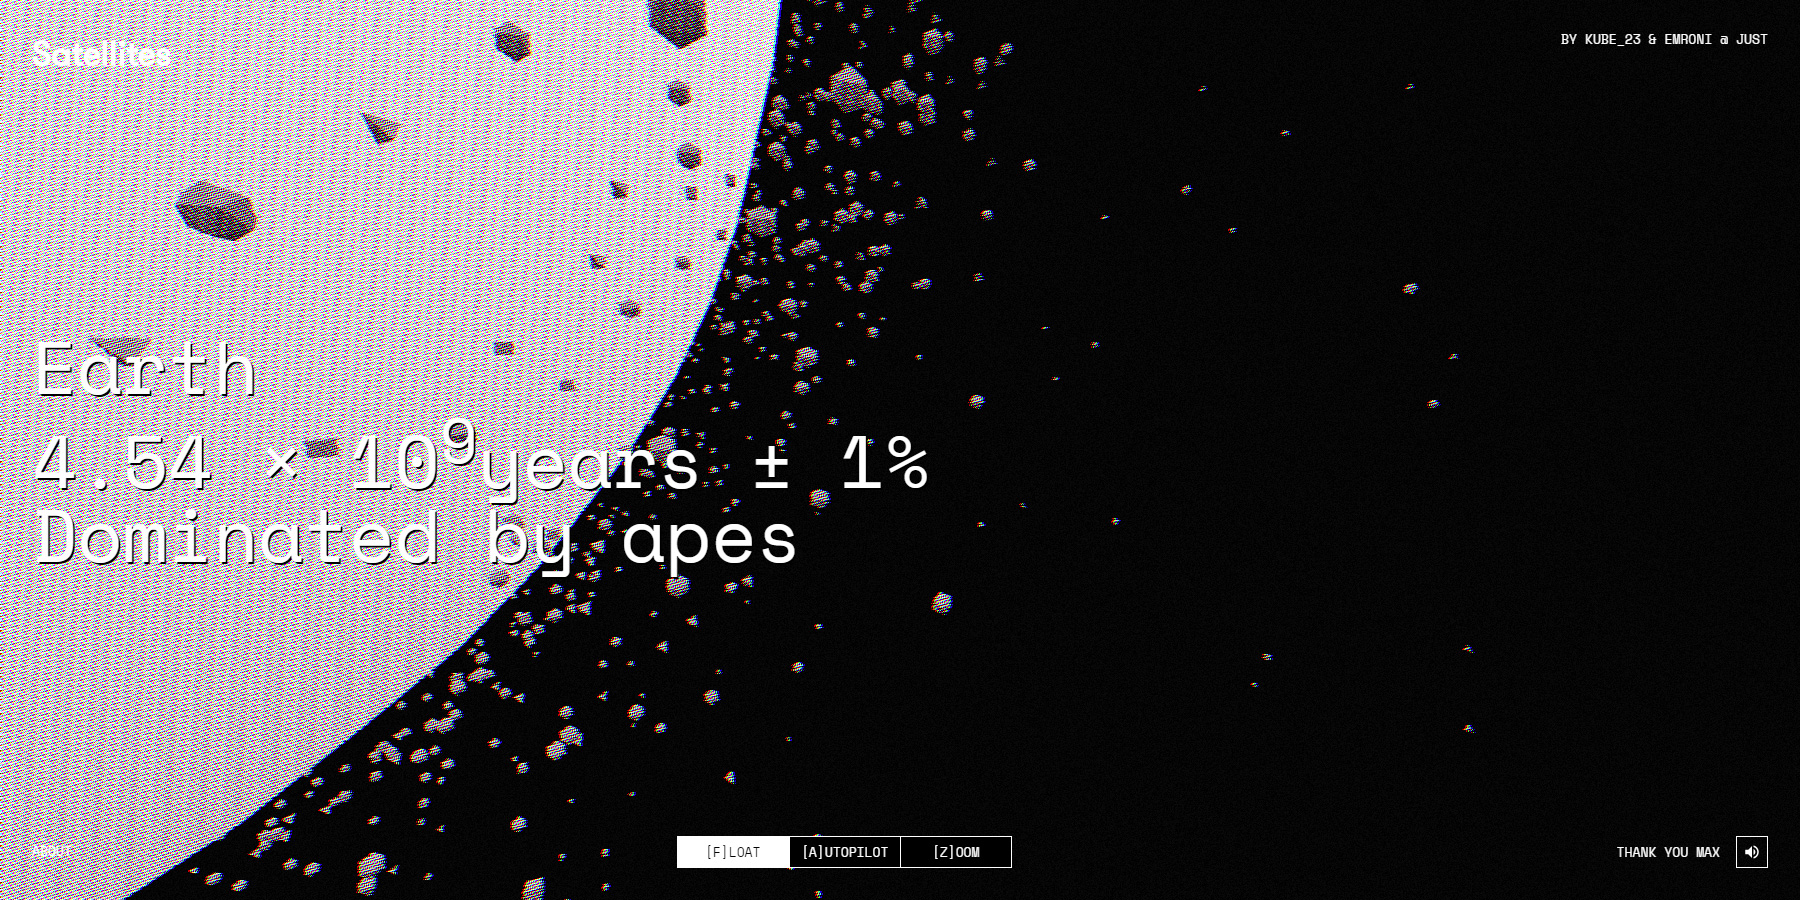 Satellites - Website of the Day